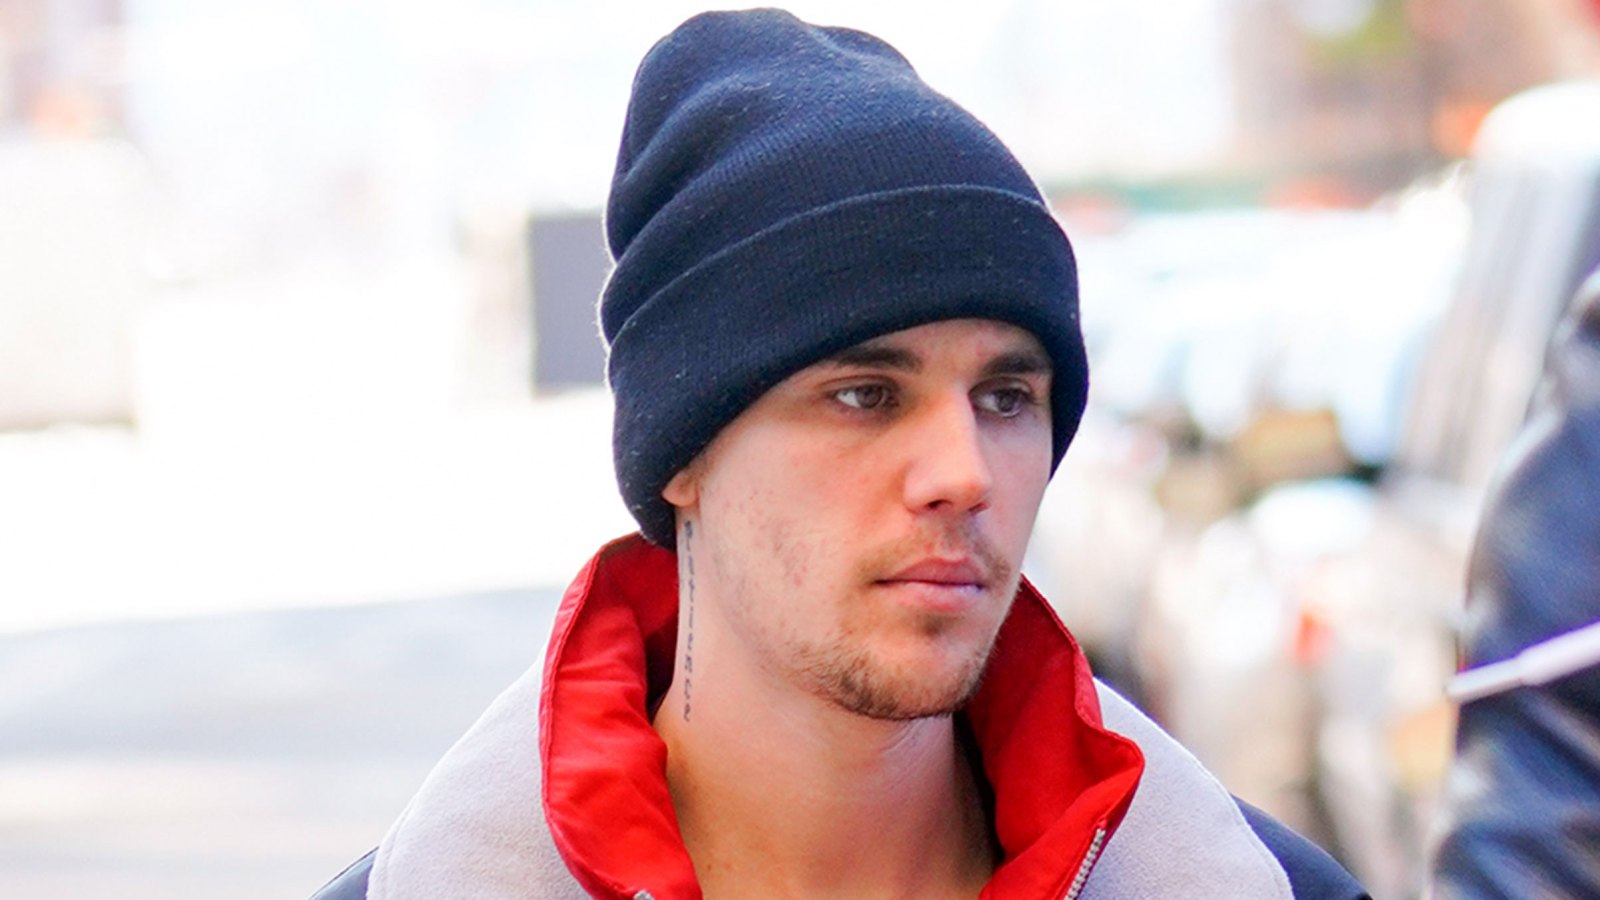 Justin Bieber Asks for ‘Prayers’ as He’s Been Struggling a Lot Lately